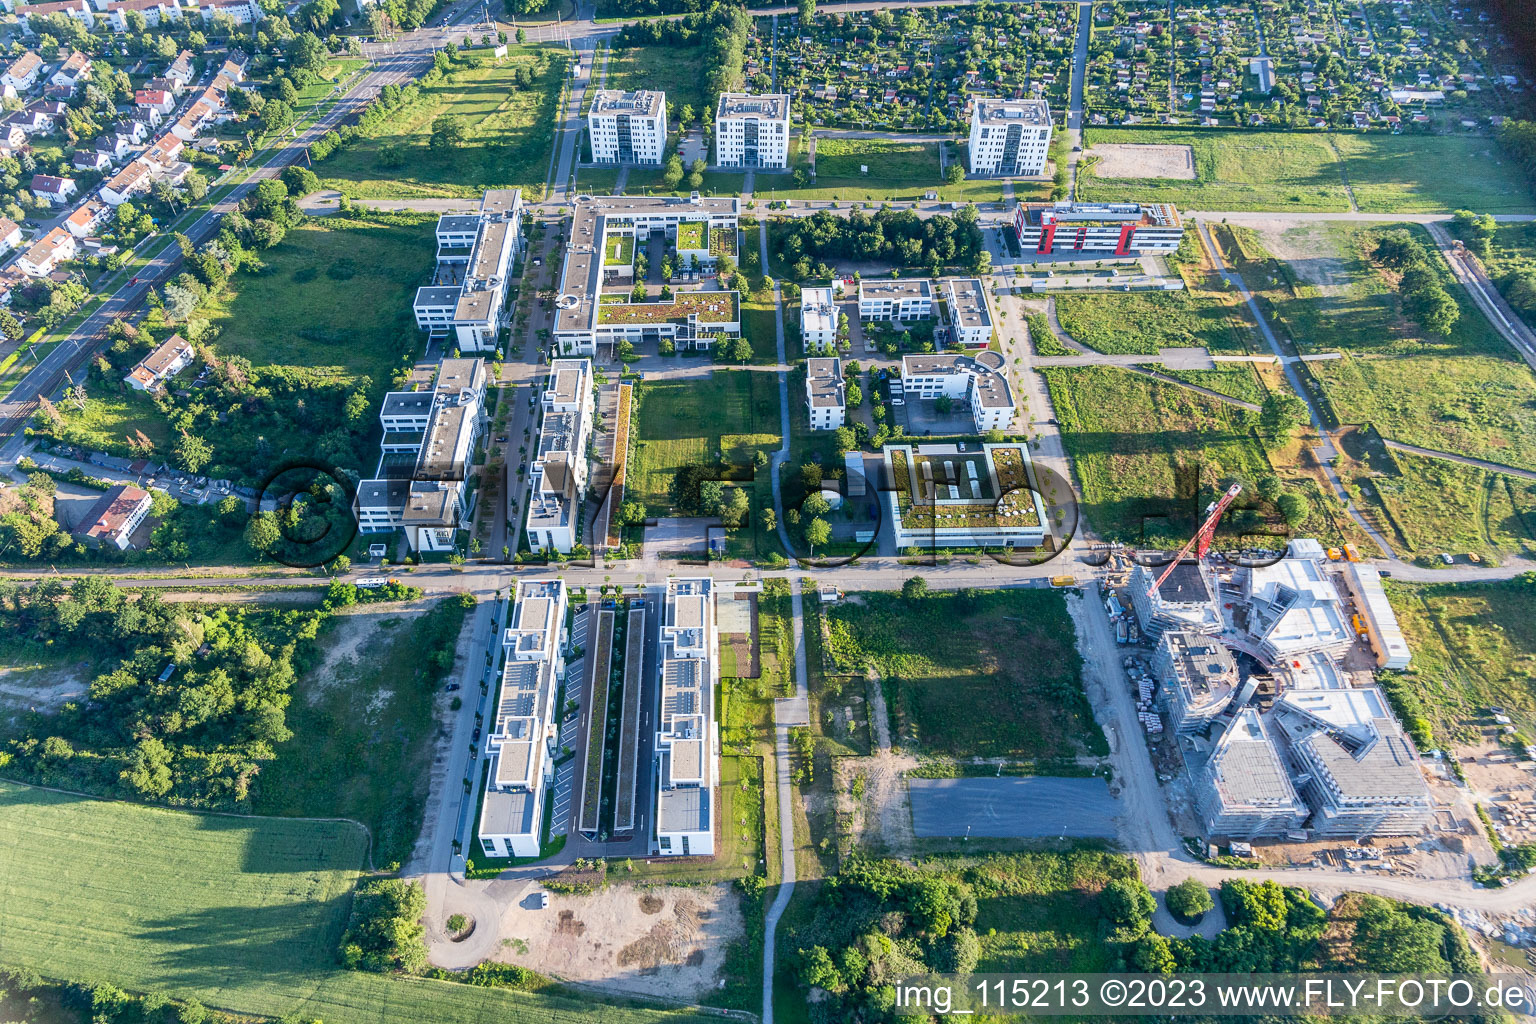 Drone recording of Technology Park in the district Rintheim in Karlsruhe in the state Baden-Wuerttemberg, Germany